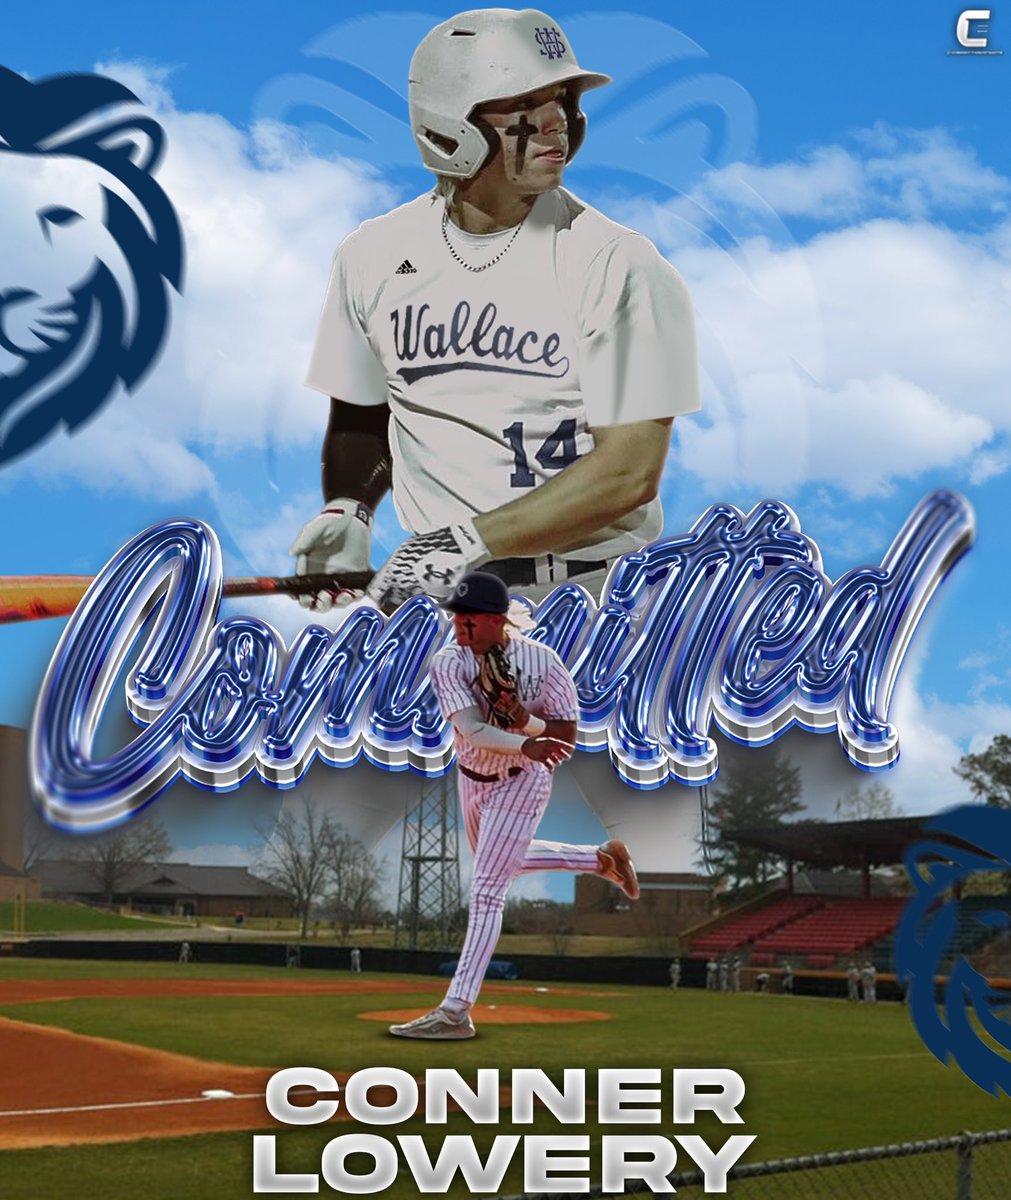 Blessed to announce I will be continuing my academic and athletic career at Wallace State community college. I want to thank my coaches, family, and friends for helping me along the way. Most of all my Lord and savior for allowing me to play at the next level. @WallaceBaseball